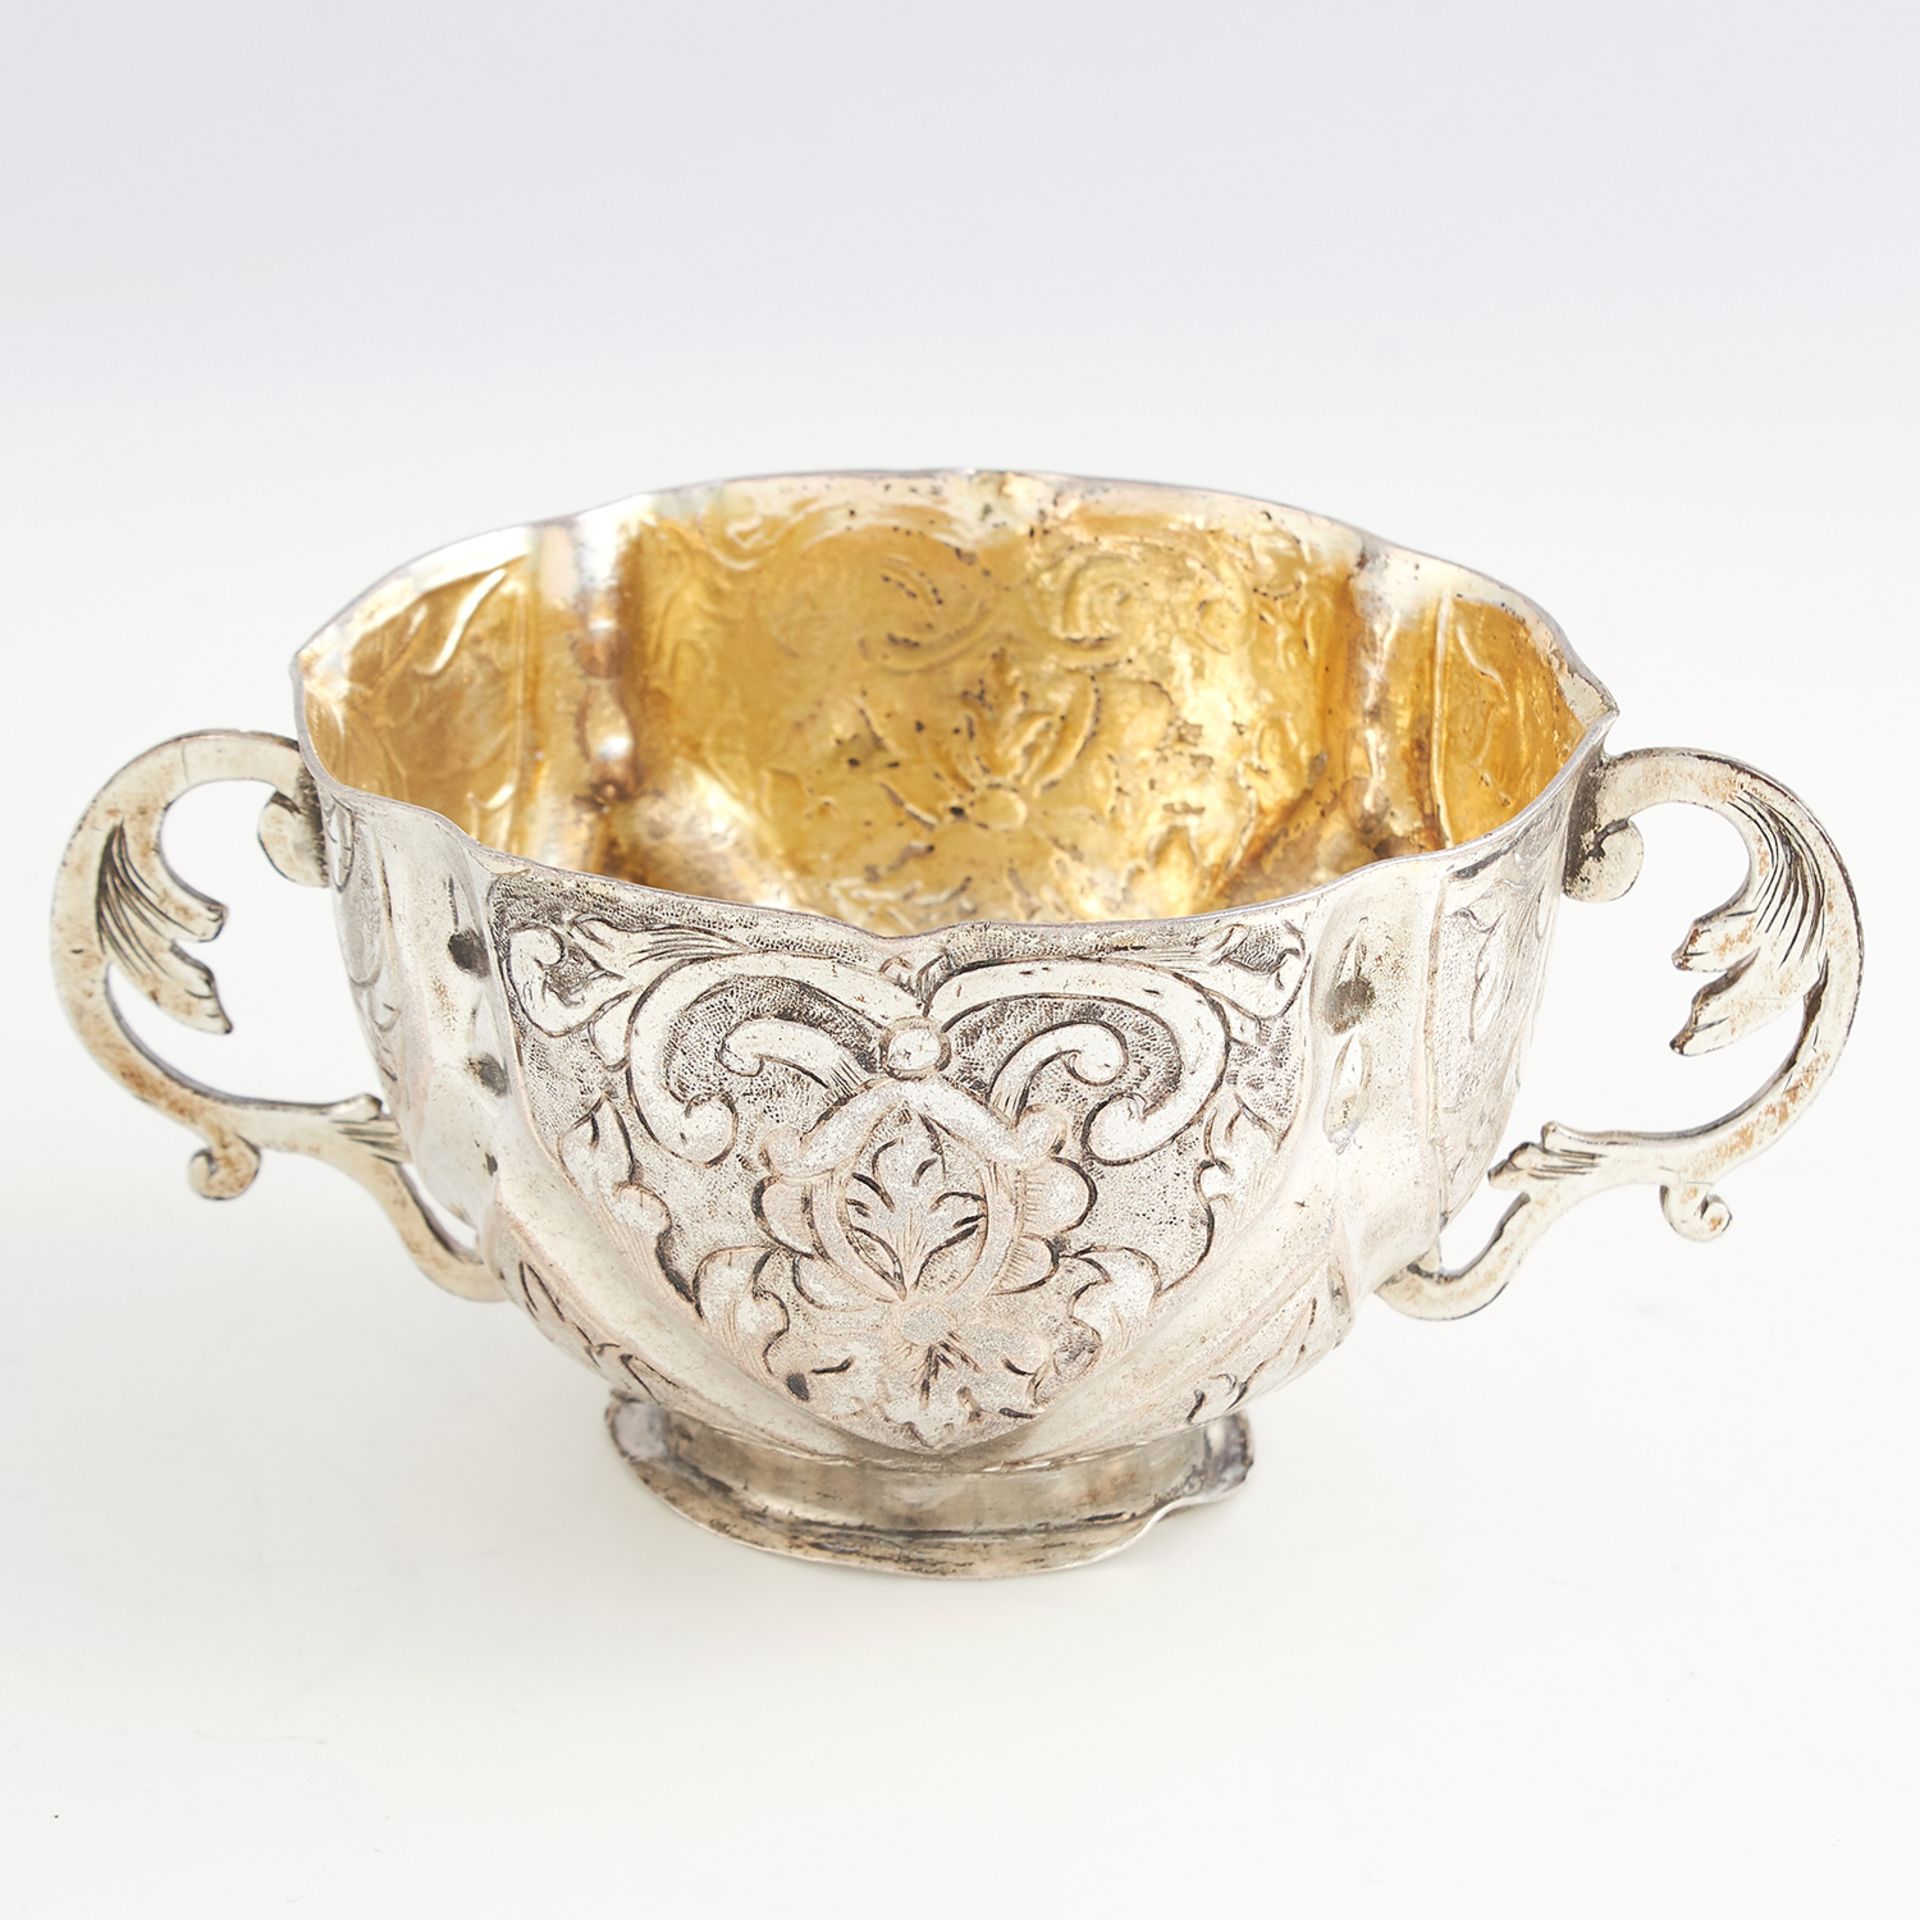 ANTIQUE GERMAN SILVER PORRINGER of rounded form with chased foliate scroll decoration, twin